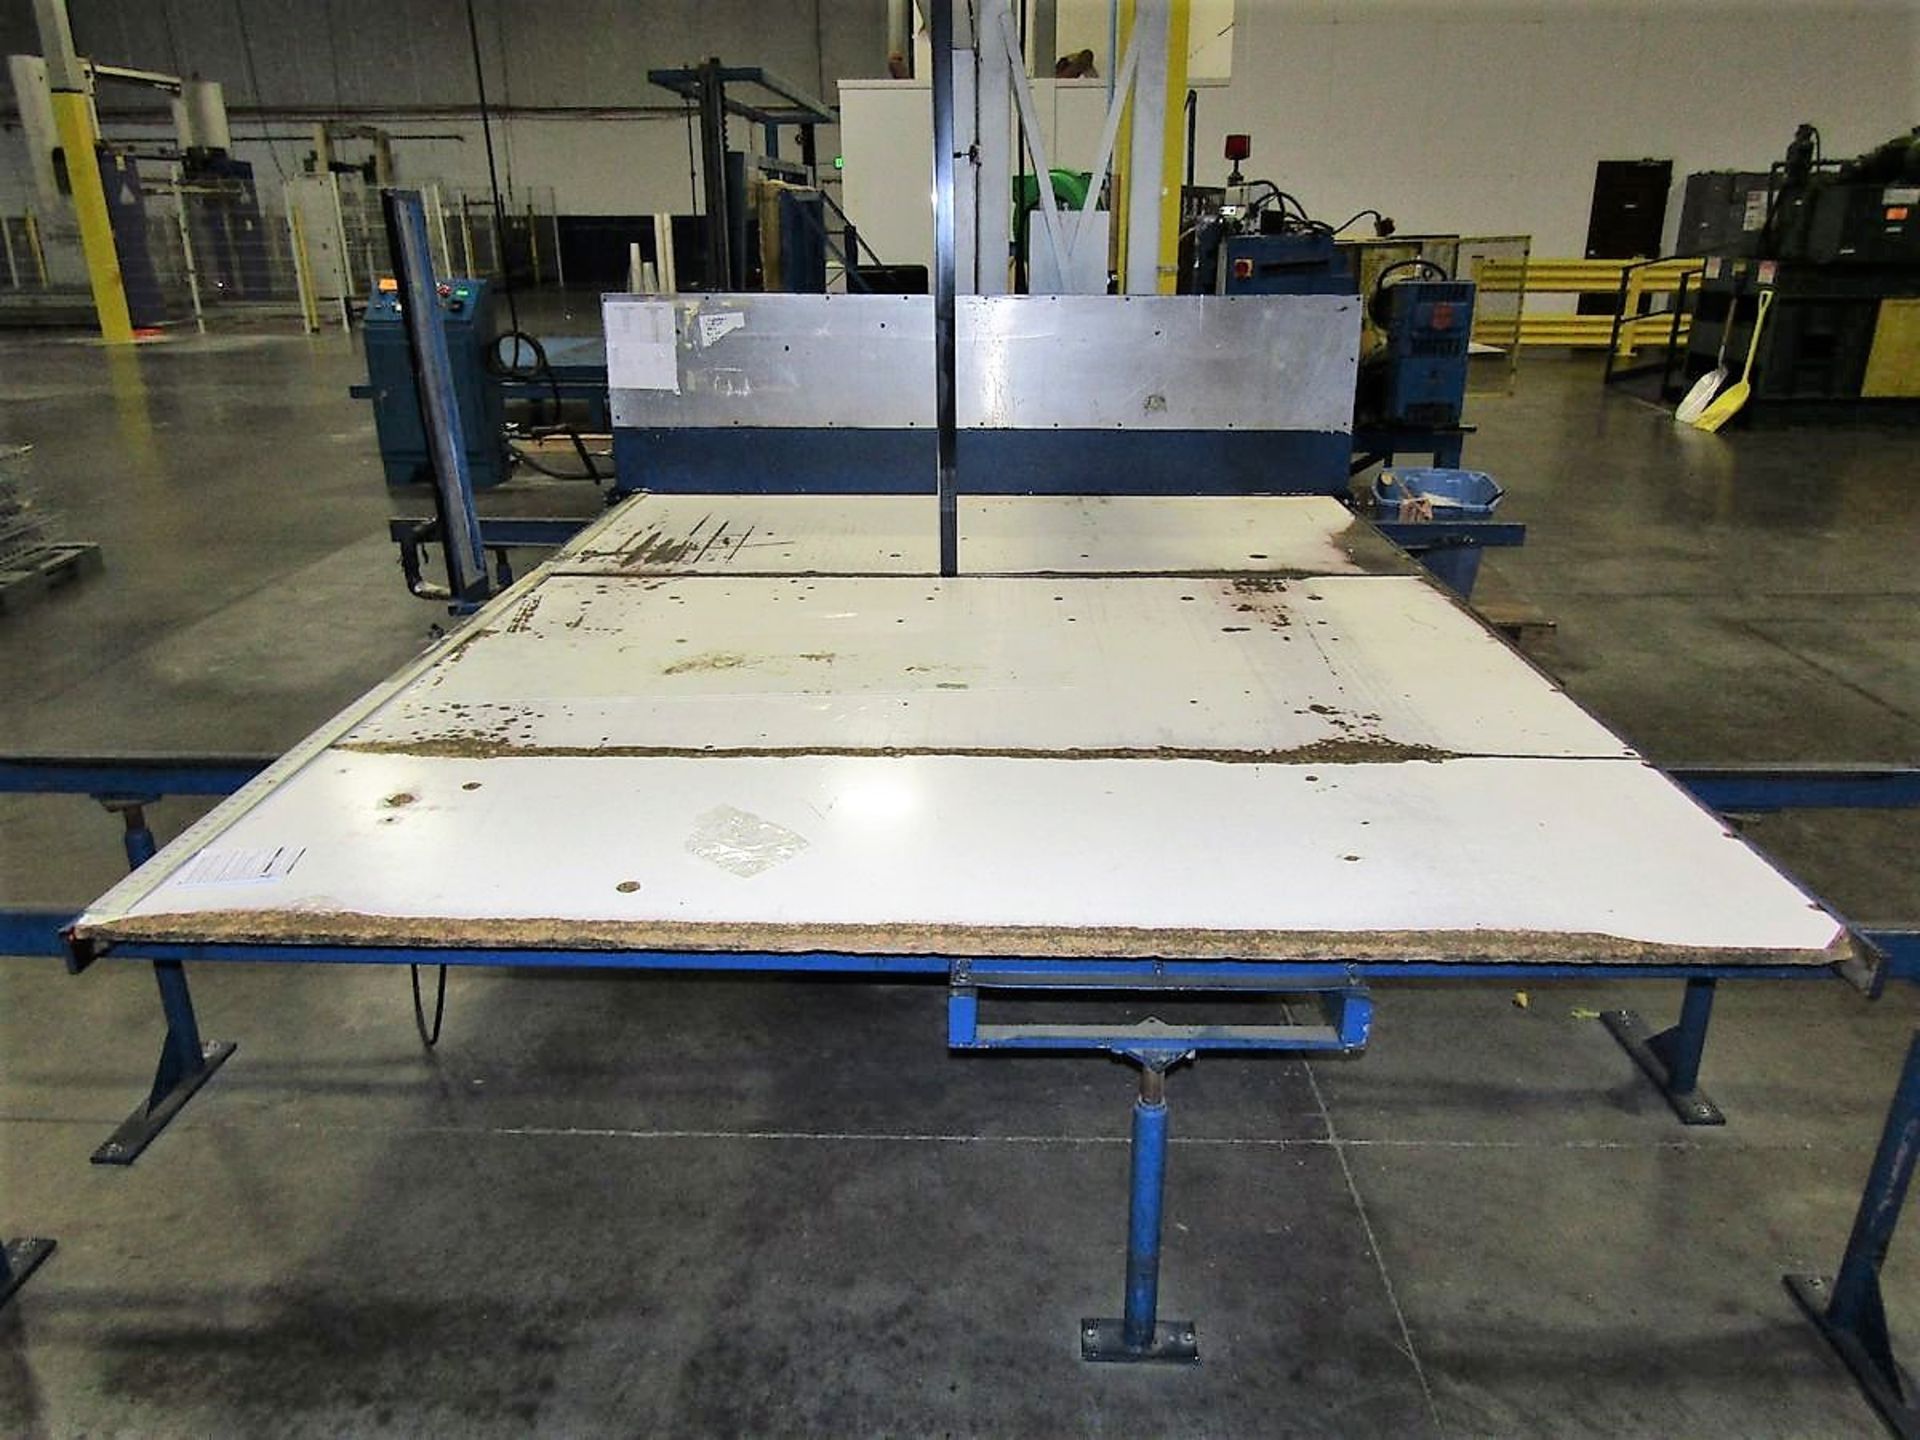 Edge-Sweets CL-3 Vertical Foam Bandsaw - Image 3 of 5